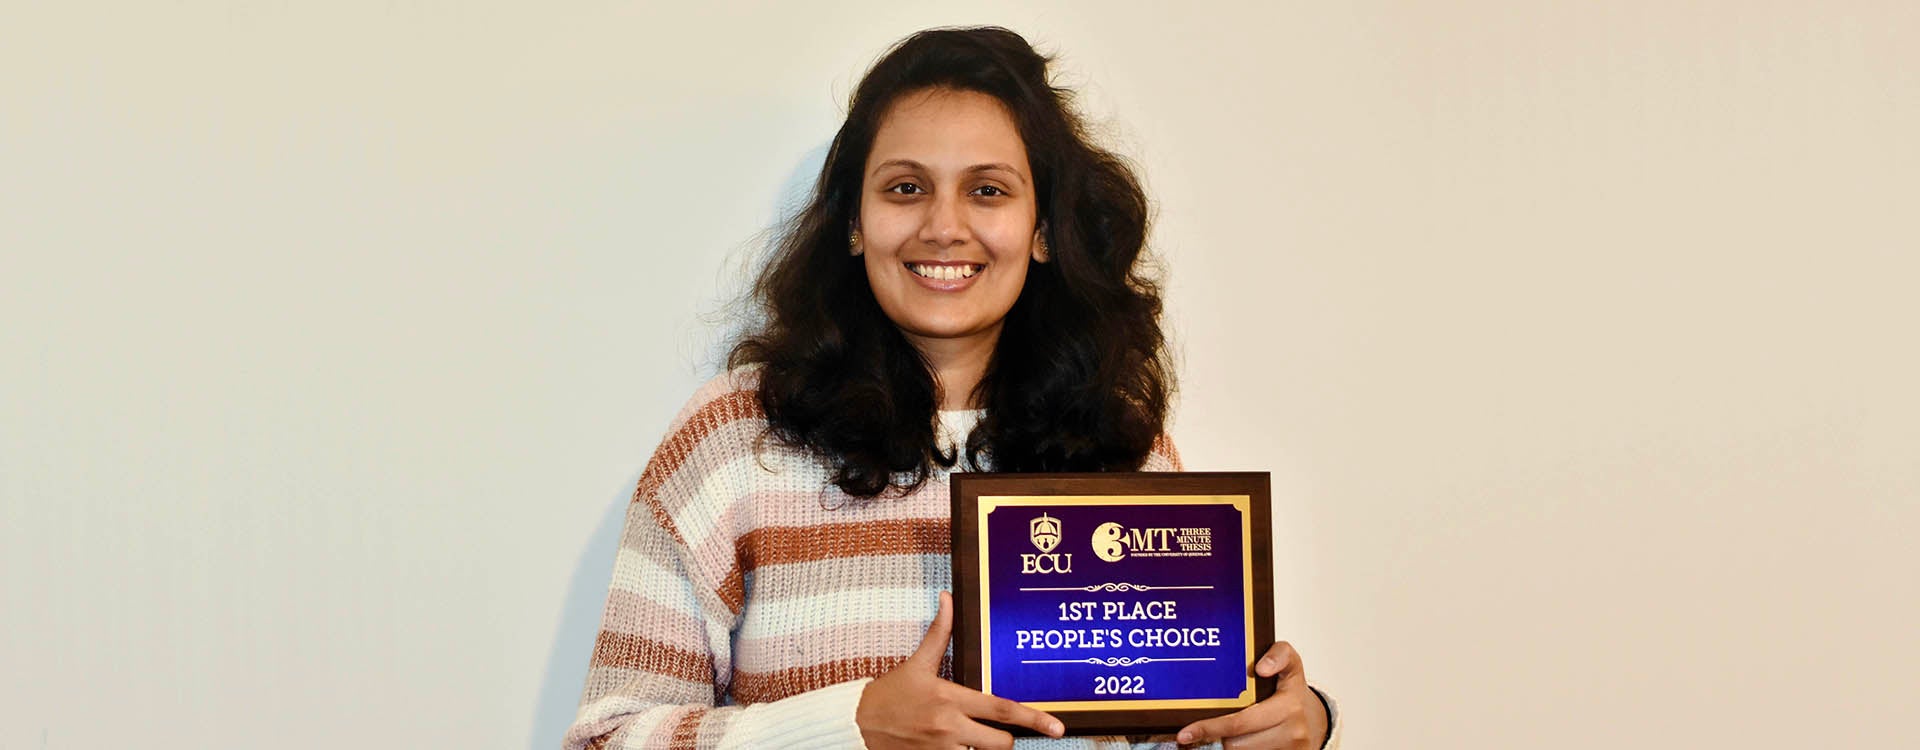 Ashwinee Mehta, a graduate student in the Department of Computer Science, displays her People’s Choice Award from the Graduate School’s annual Three-Minute Thesis (3MT) Competition. (Contributed photo)